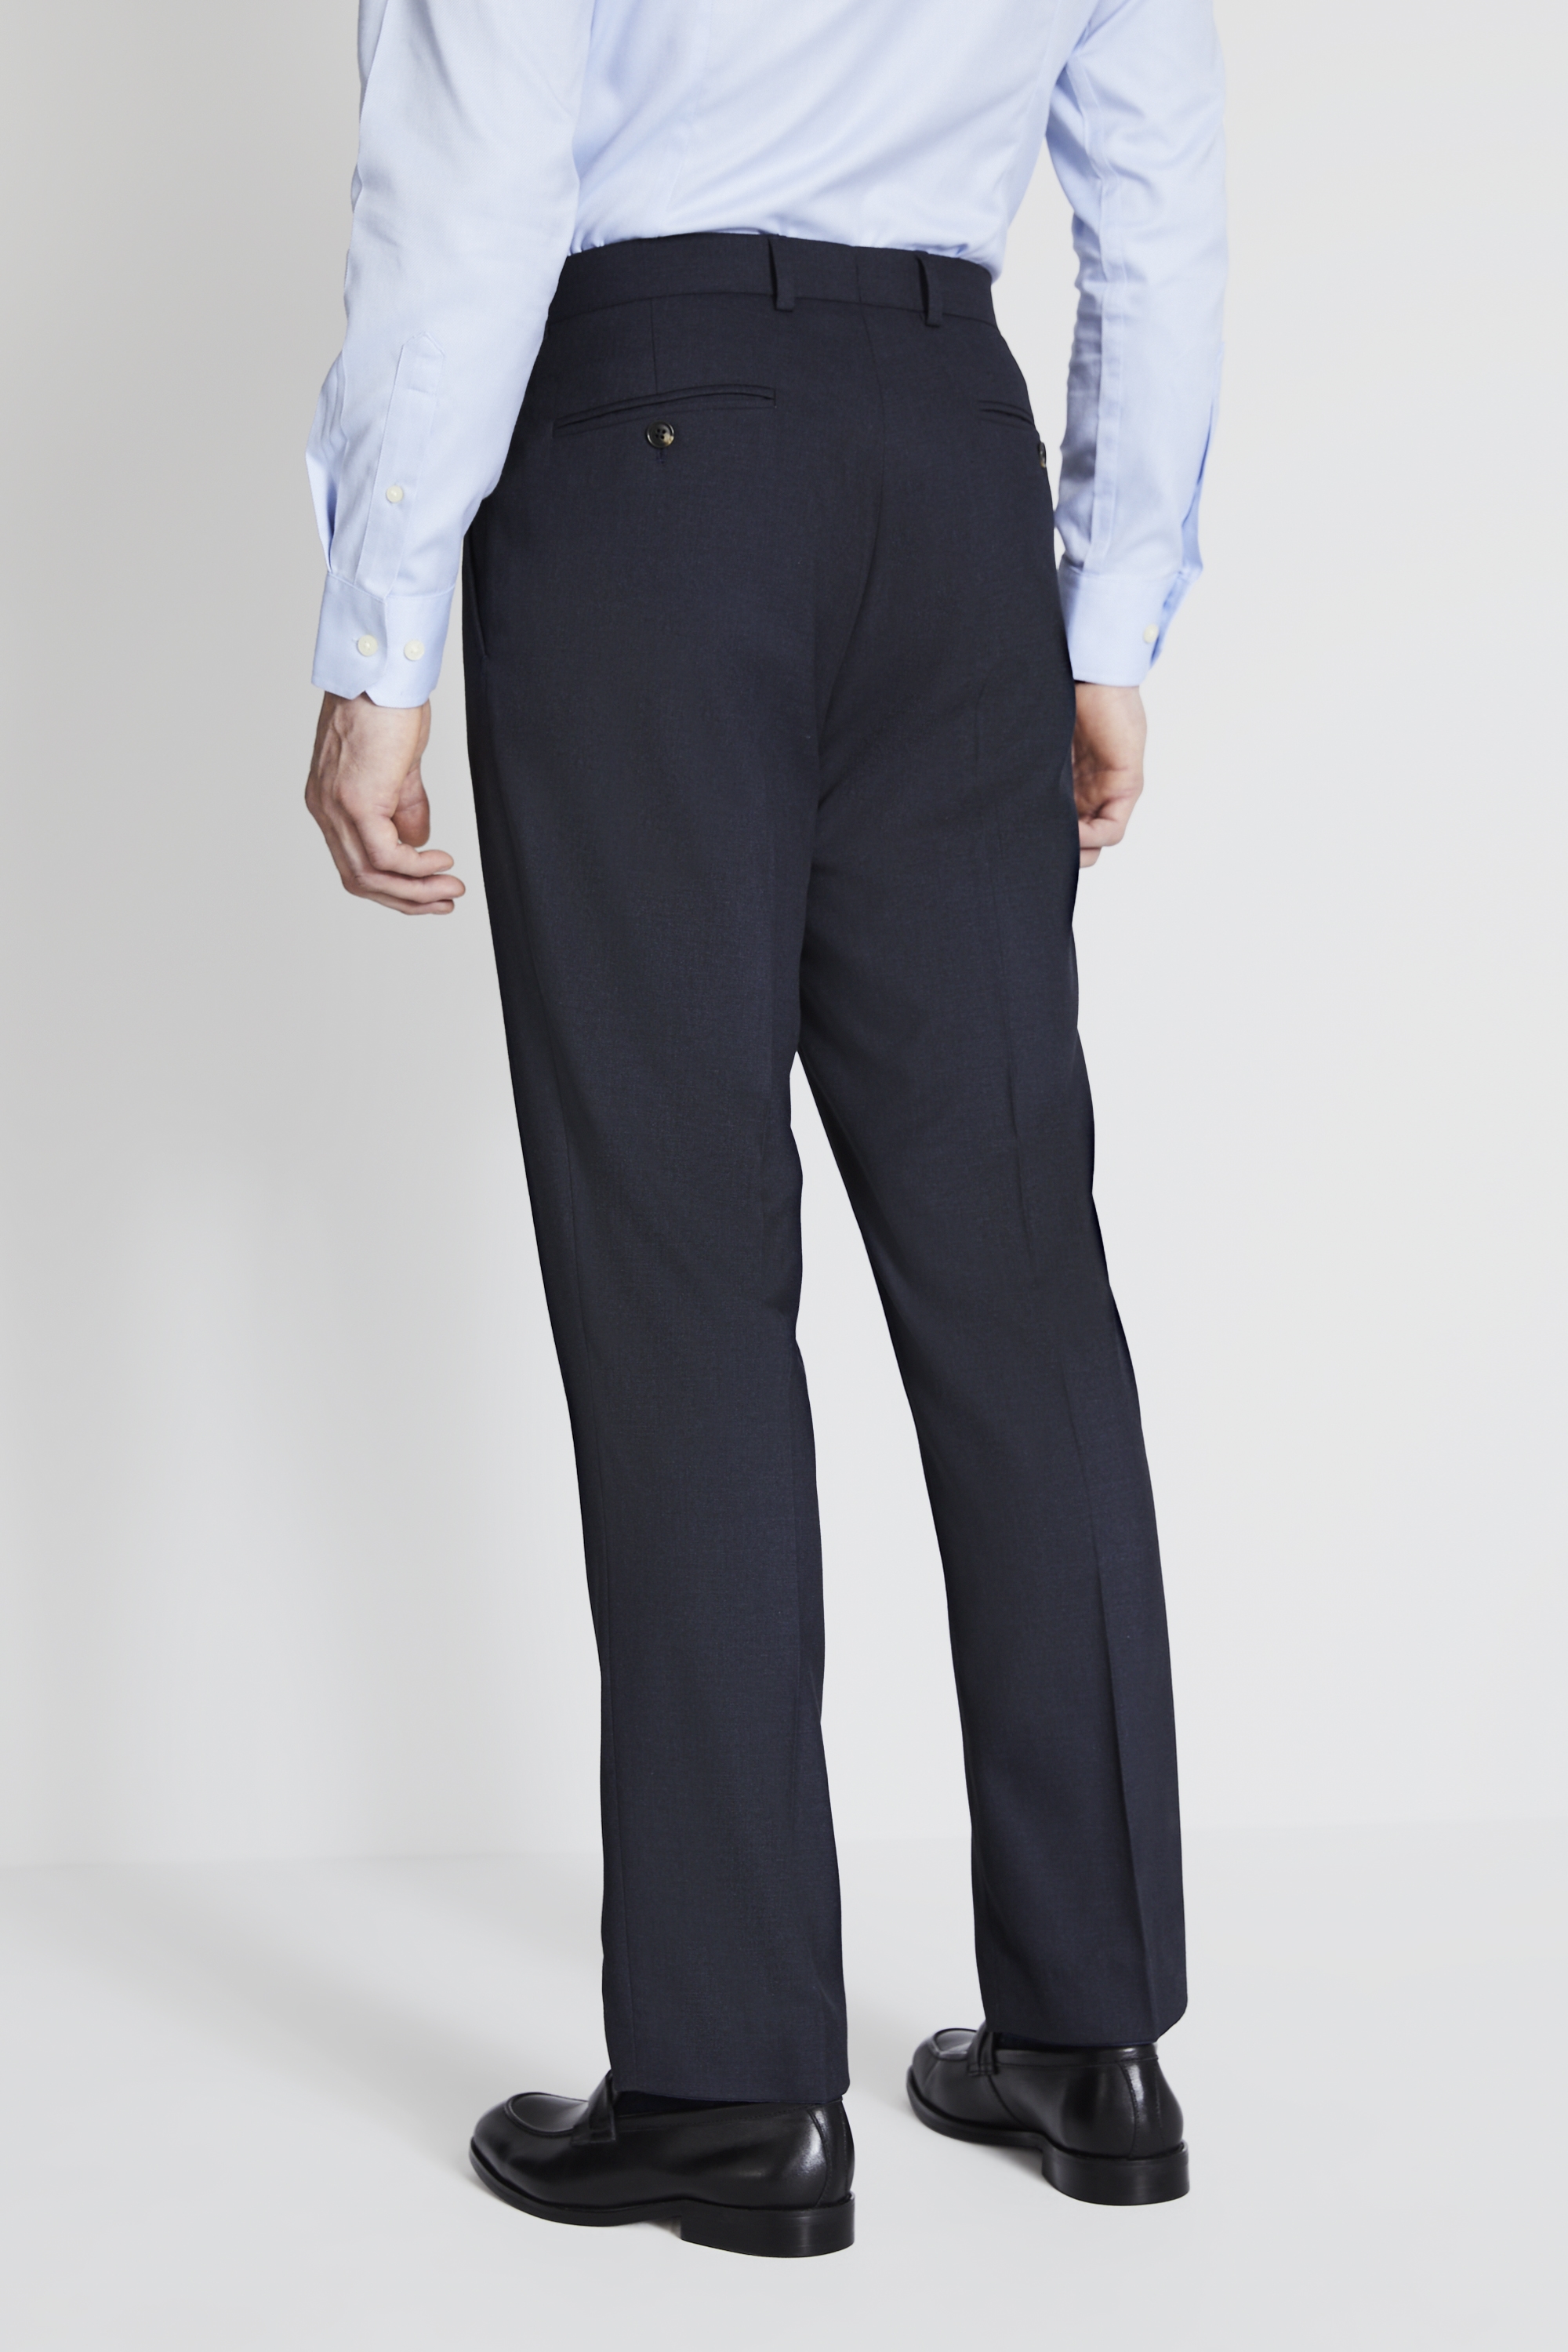 Navy Marl Trousers | Buy Online at Moss